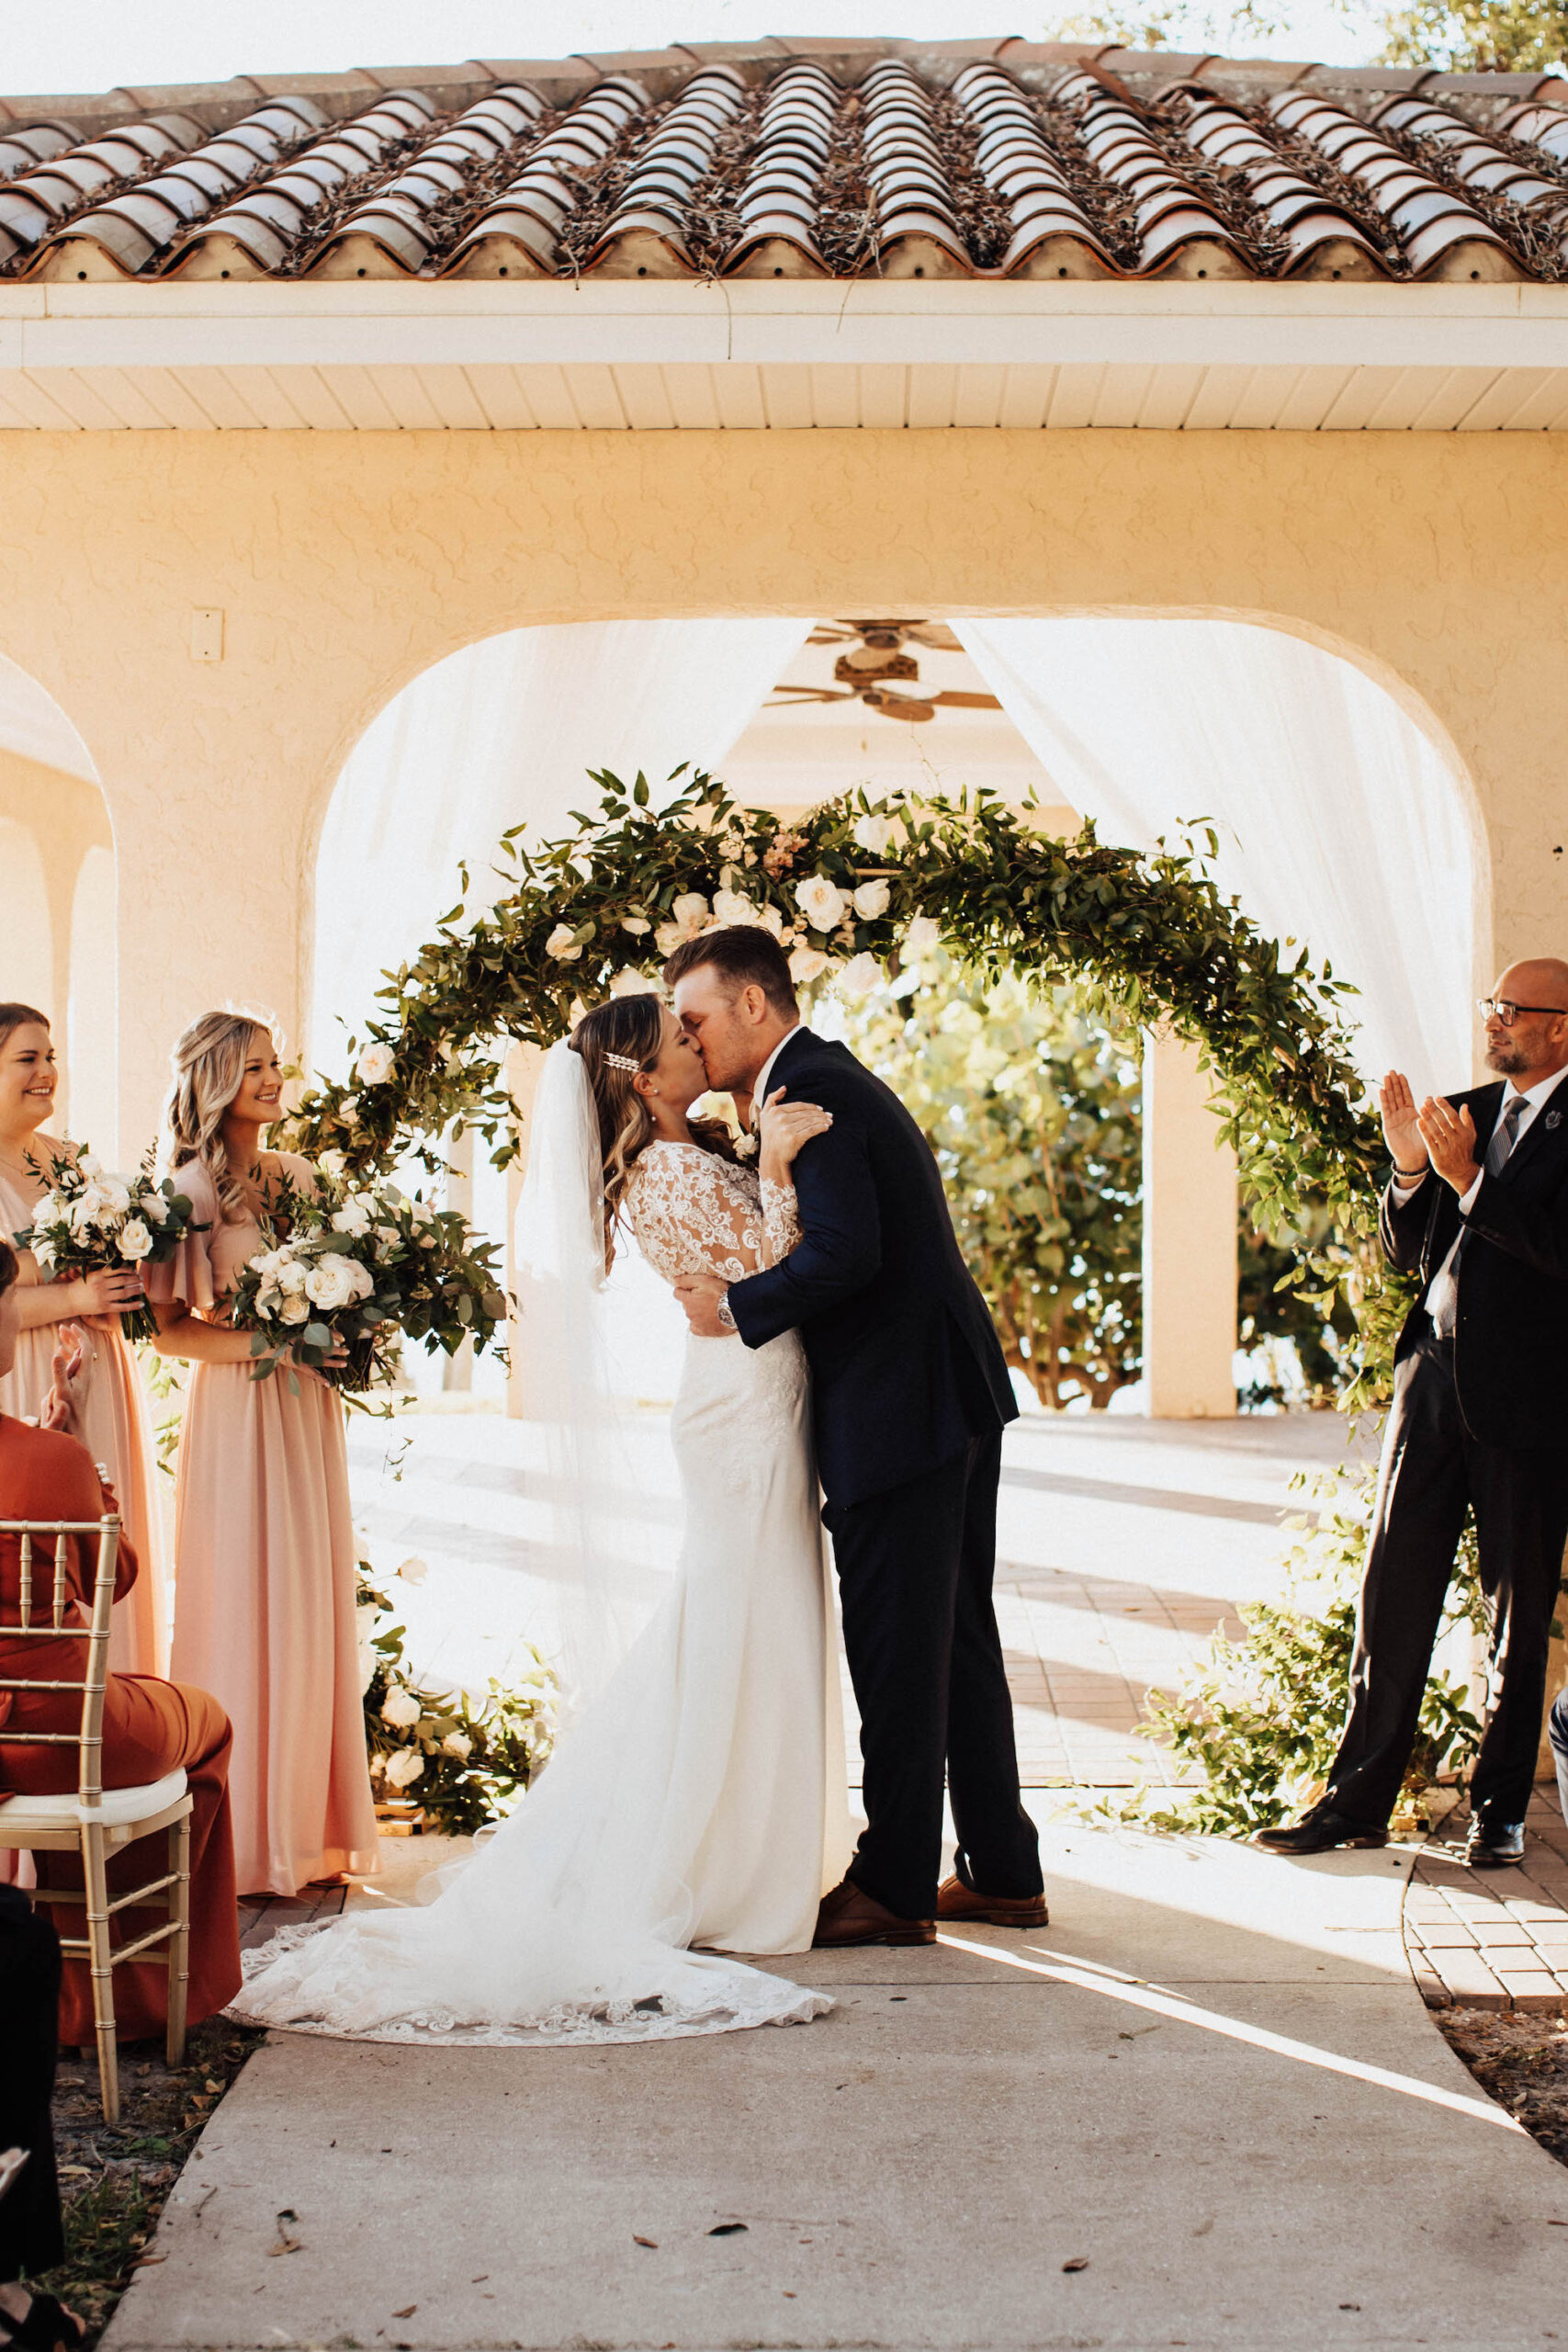 Bride and Groom First Kiss in Outdoor Wedding Ceremony with Greenery Arch